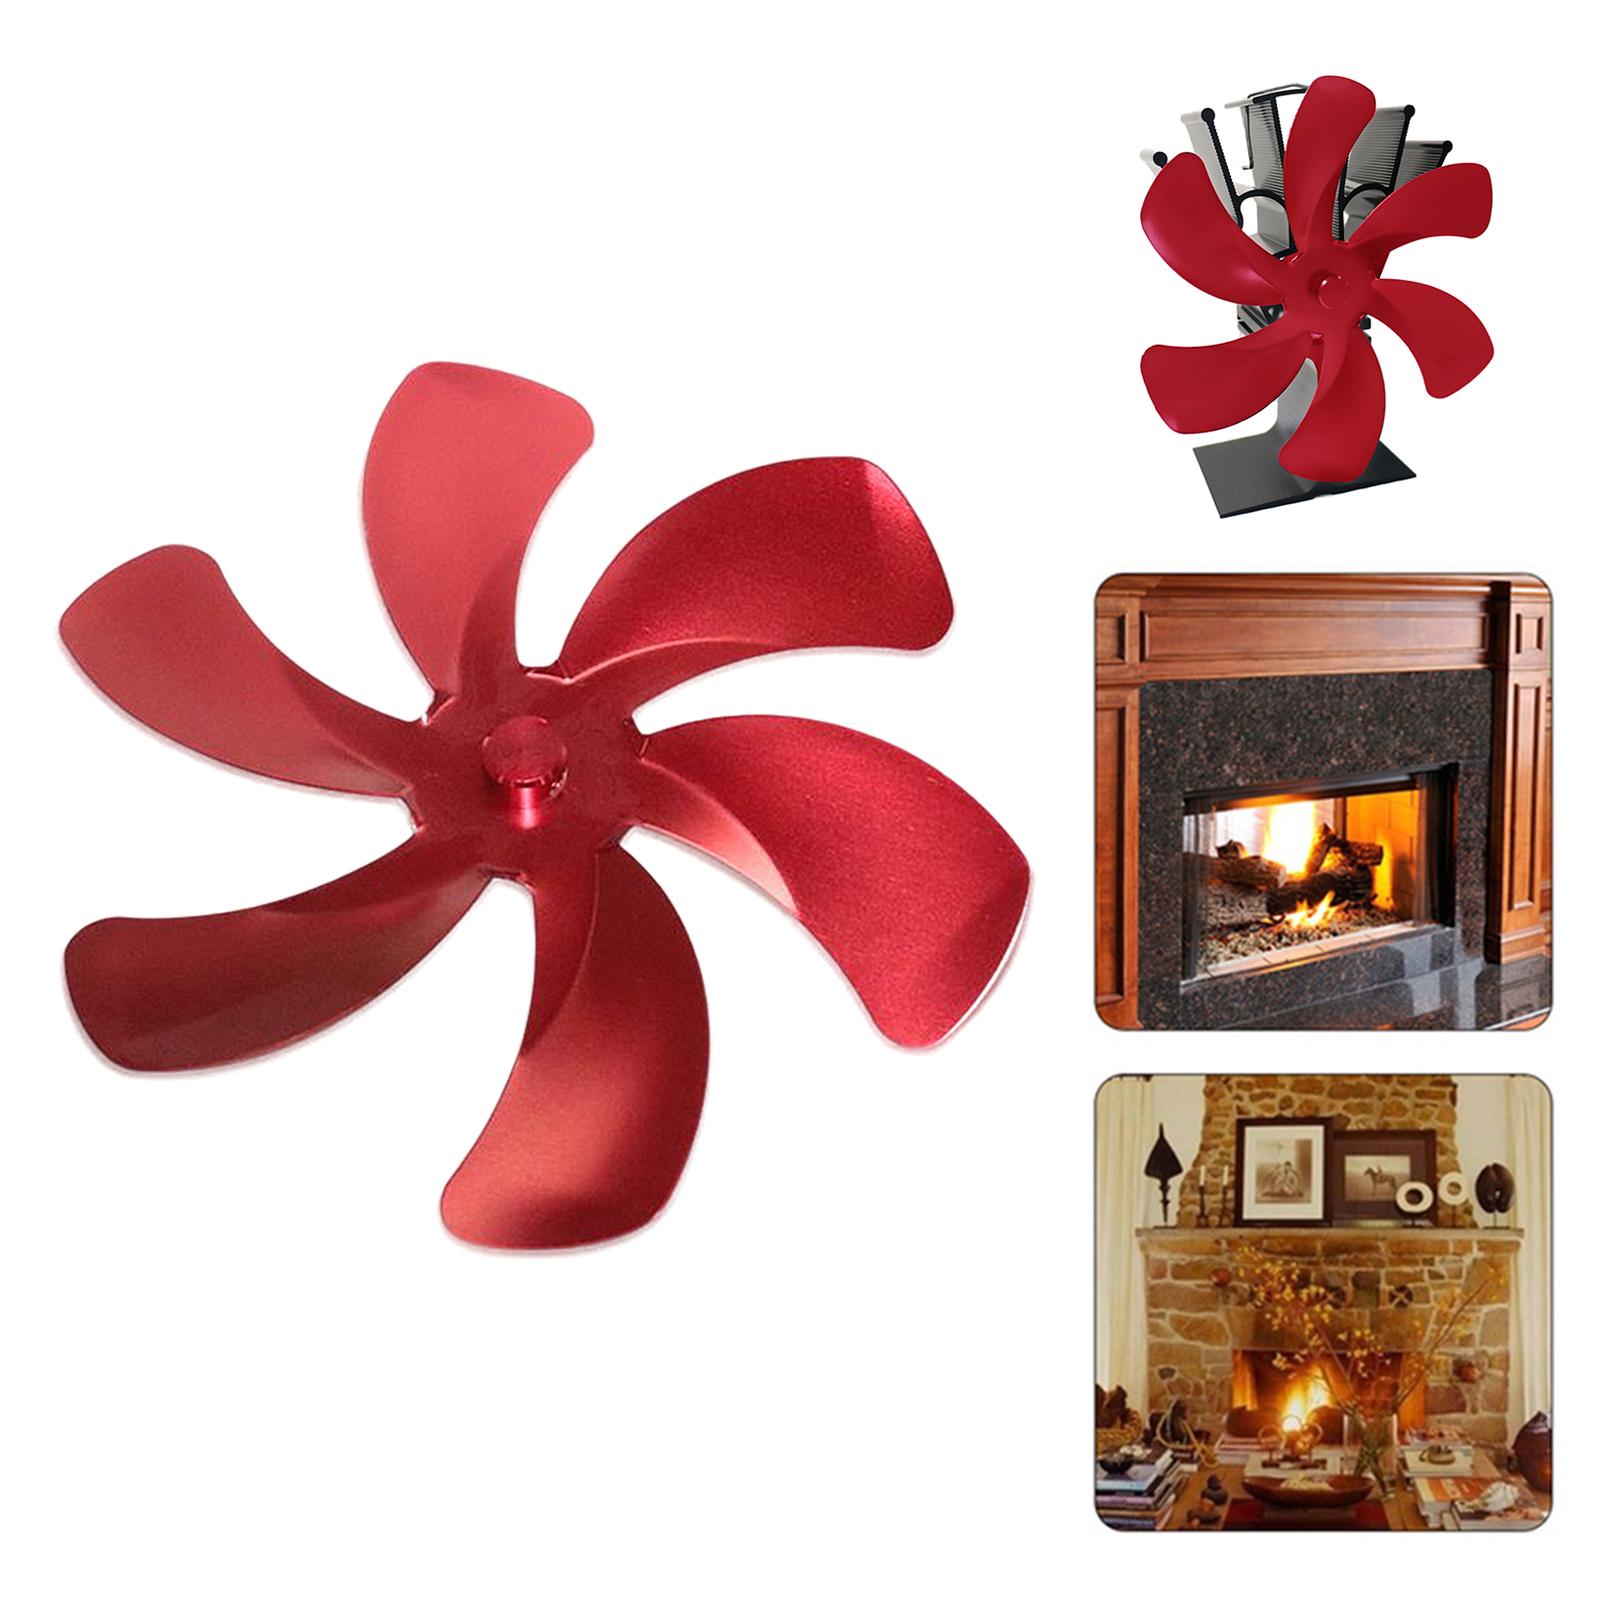 Universal Fireplace Fan Replacement Blades 6-Blade Burning Fan Blades Red